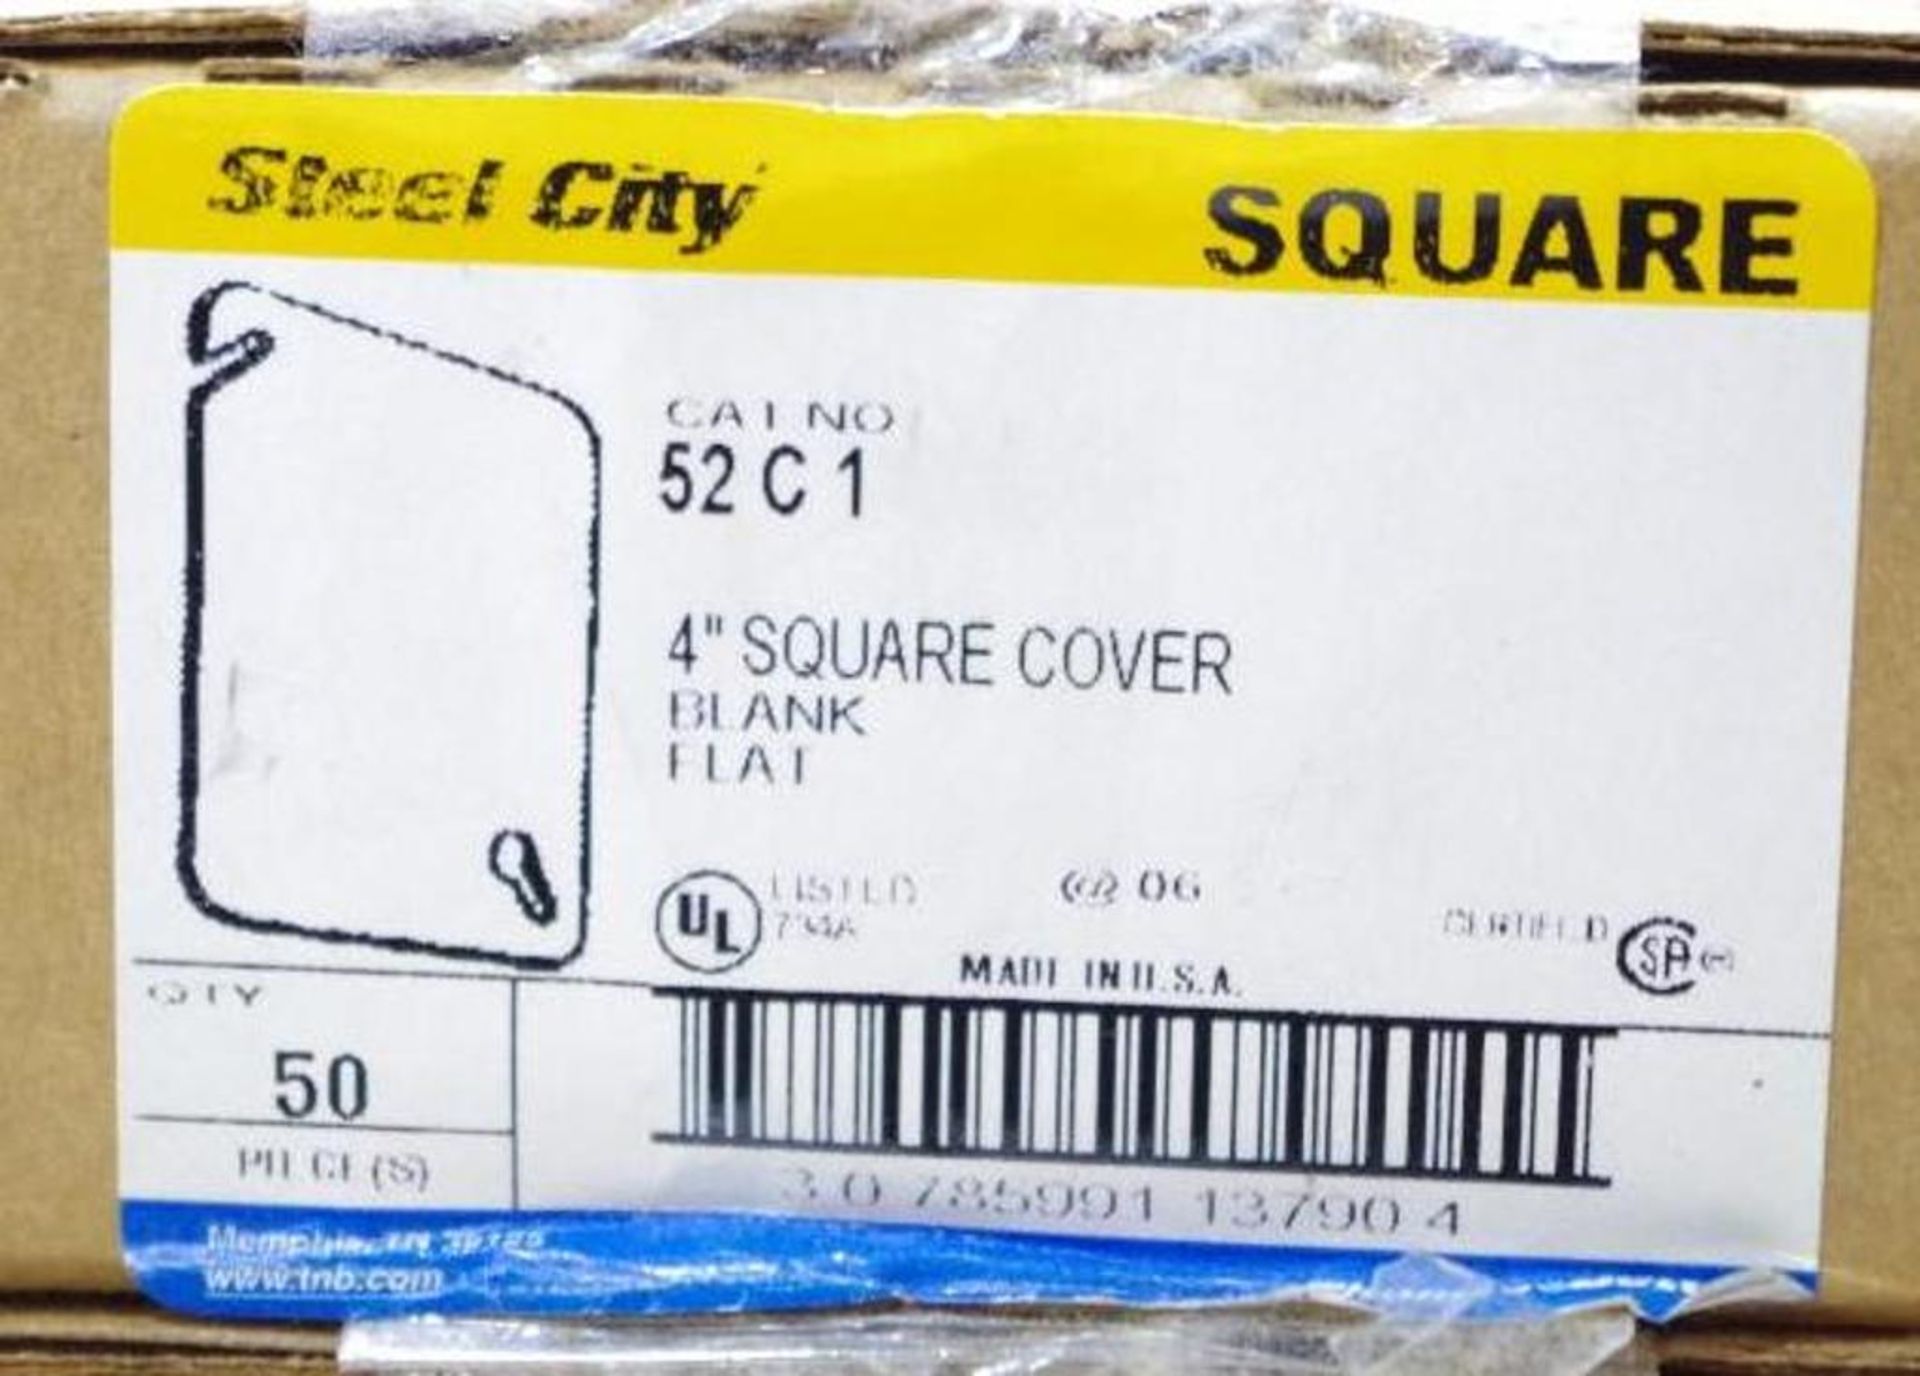 [1000] STEEL CITY 4" Flat Blank Square Covers M/N 52C1, (20 Boxes of 50) - Image 3 of 4